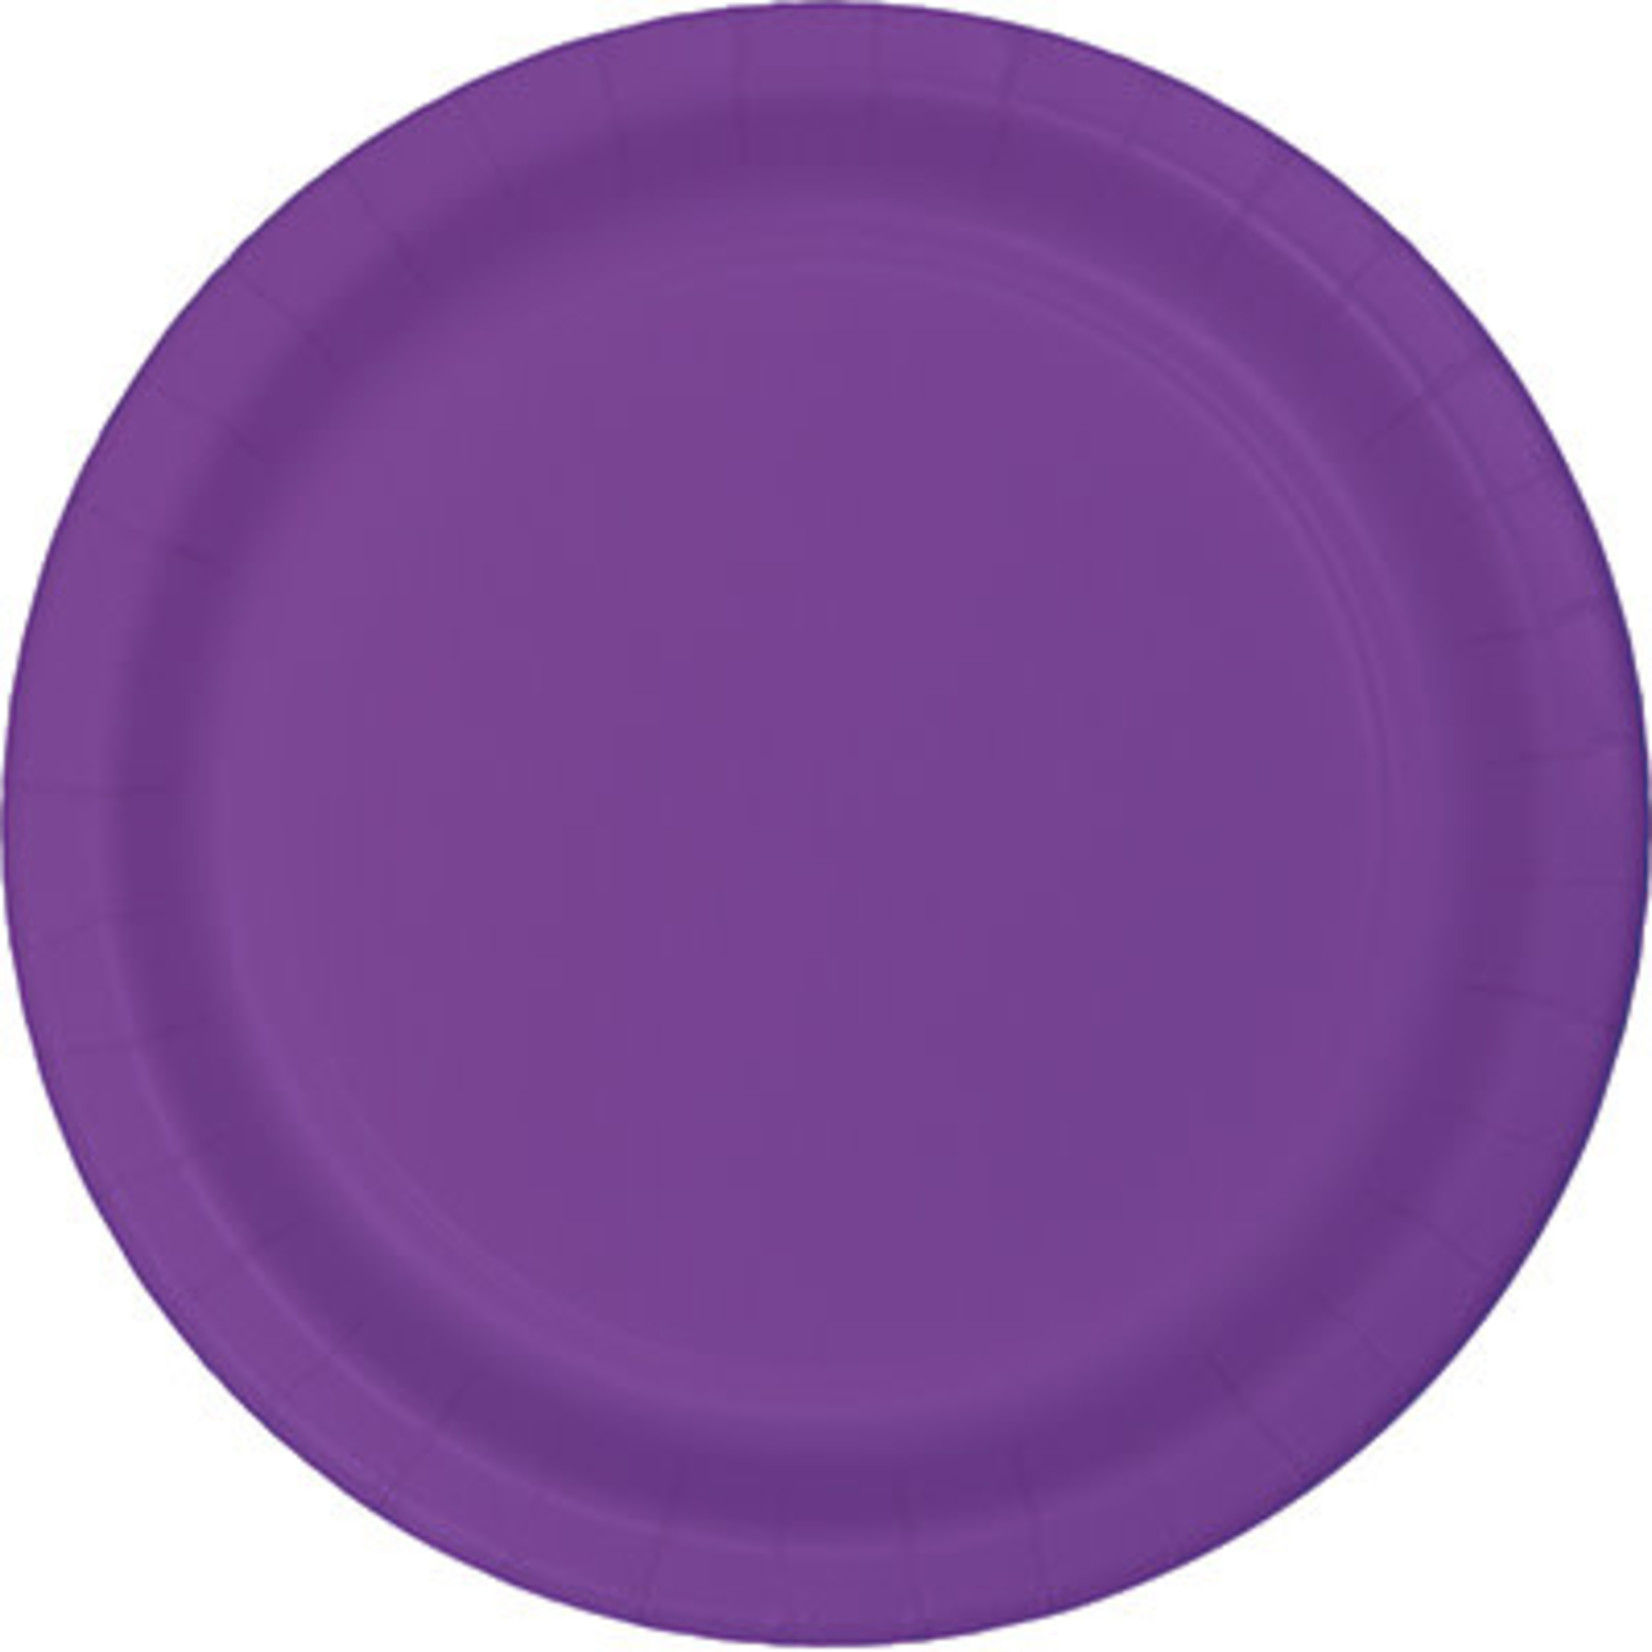 Touch of Color 10" Amethyst Purple Plastic Banquet Plates - 20ct.